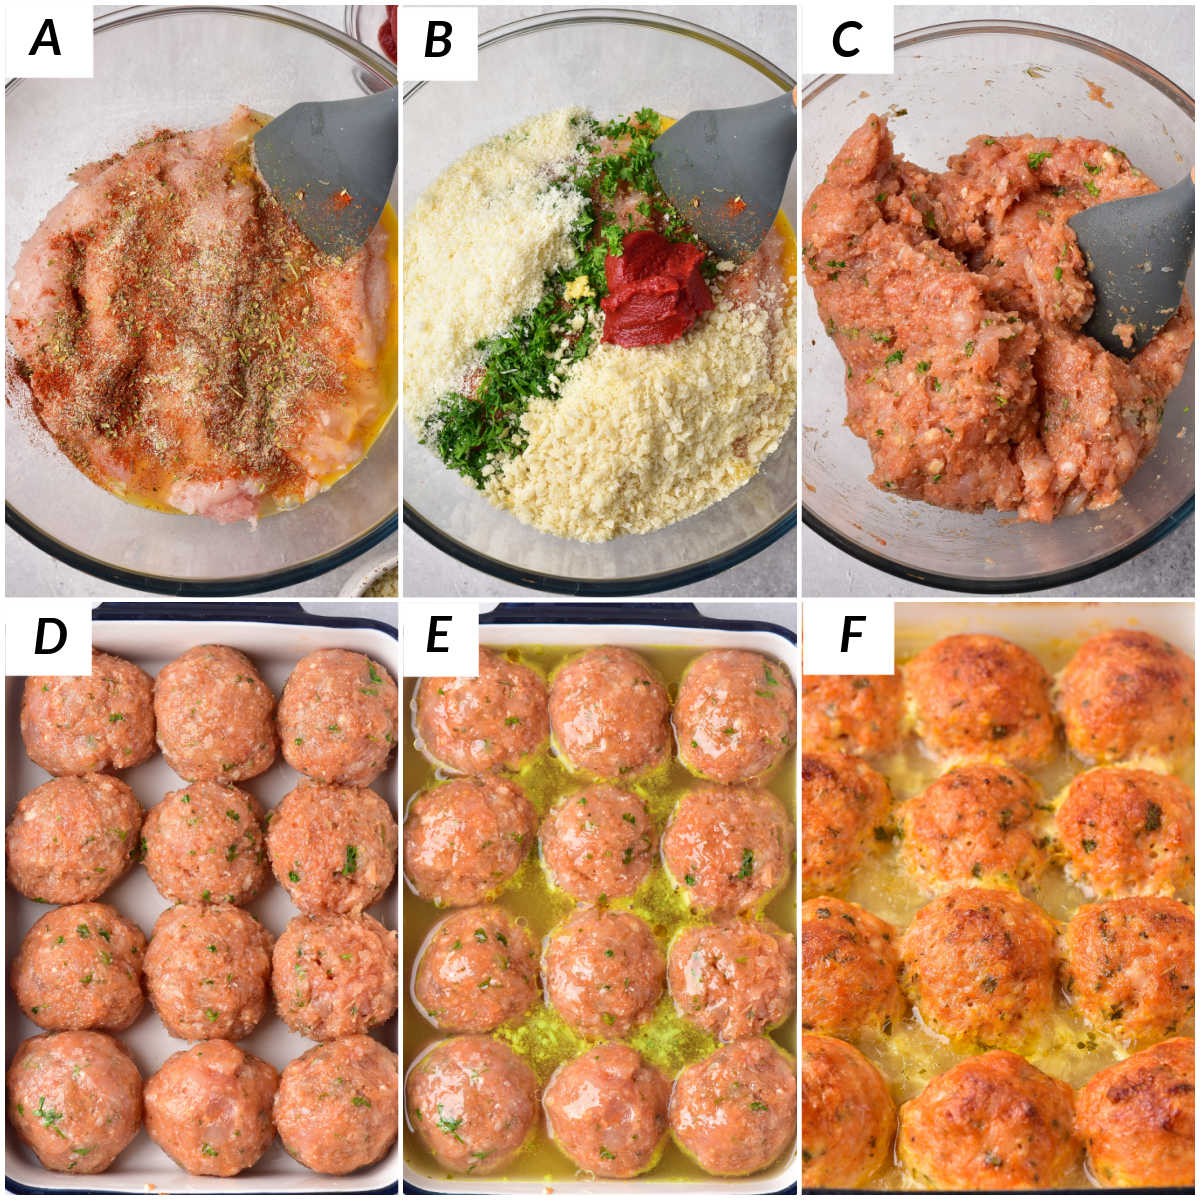 image collage showing the steps for making chicken meatballs